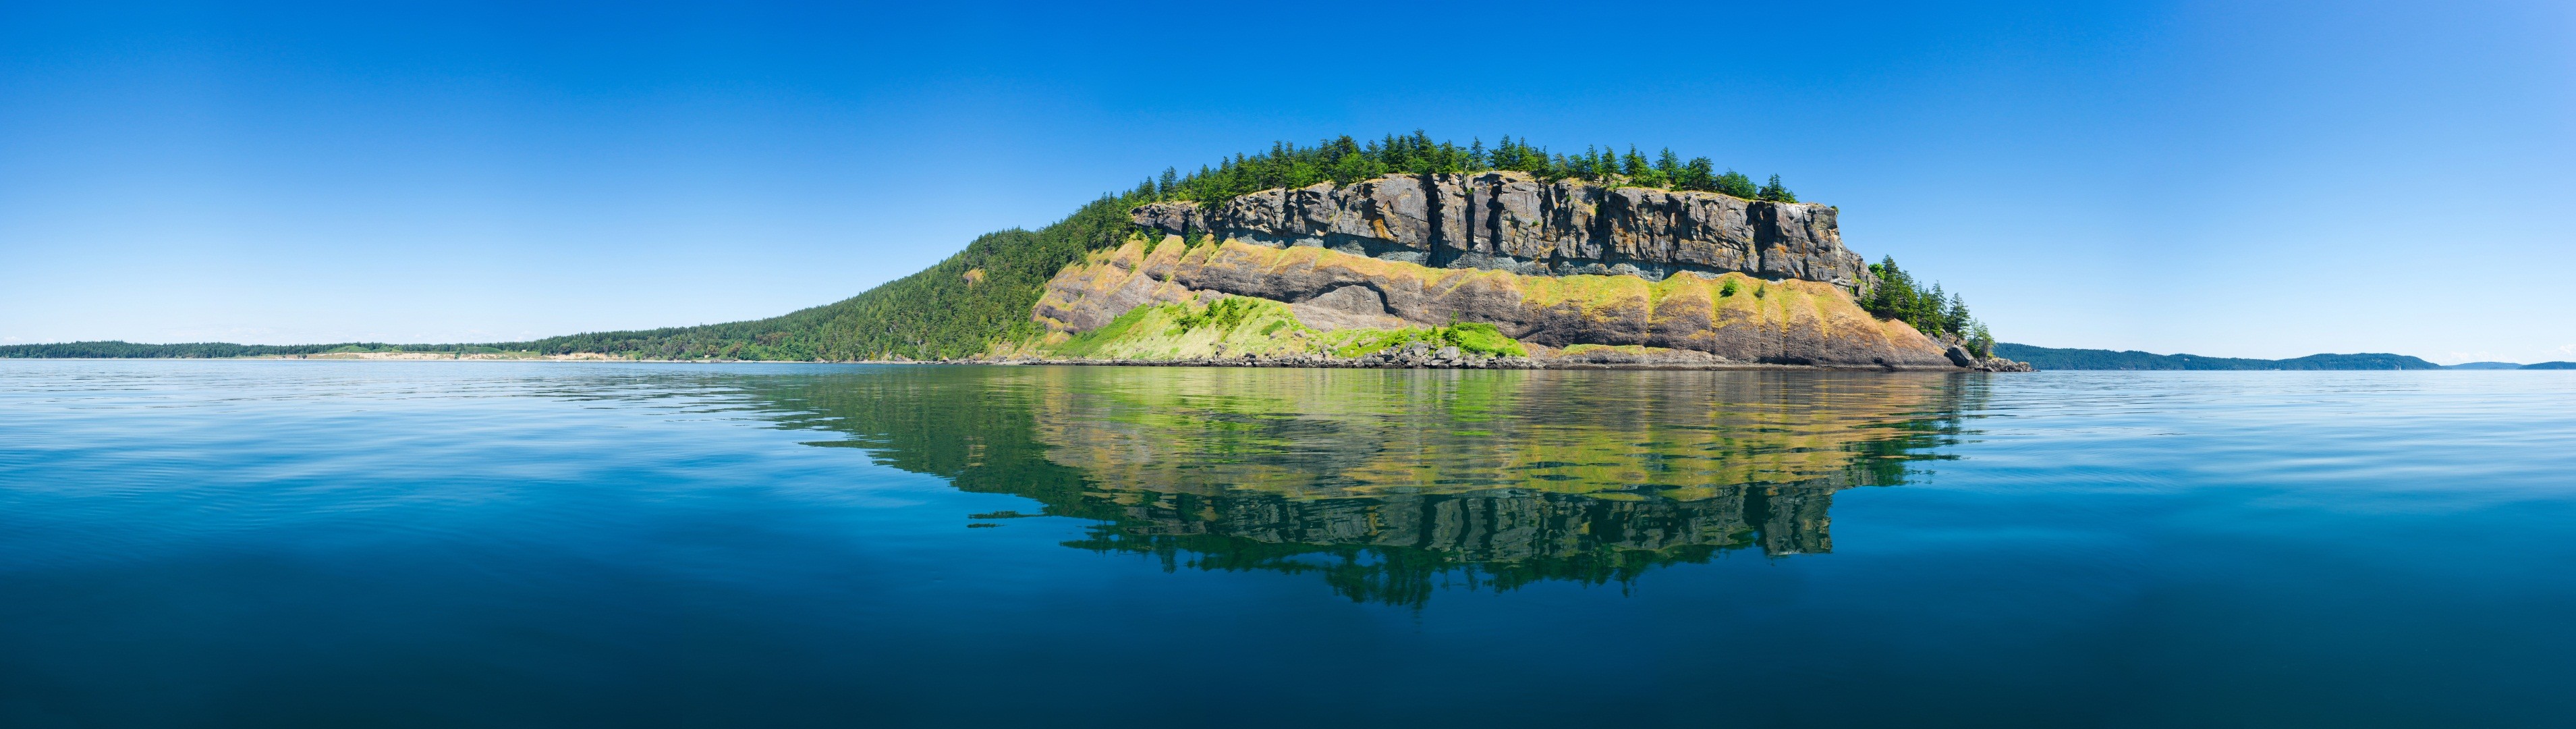 Panoramas Island Cliff Forest Lake Water Blue Green Nature Landscape Reflection 3818x1080